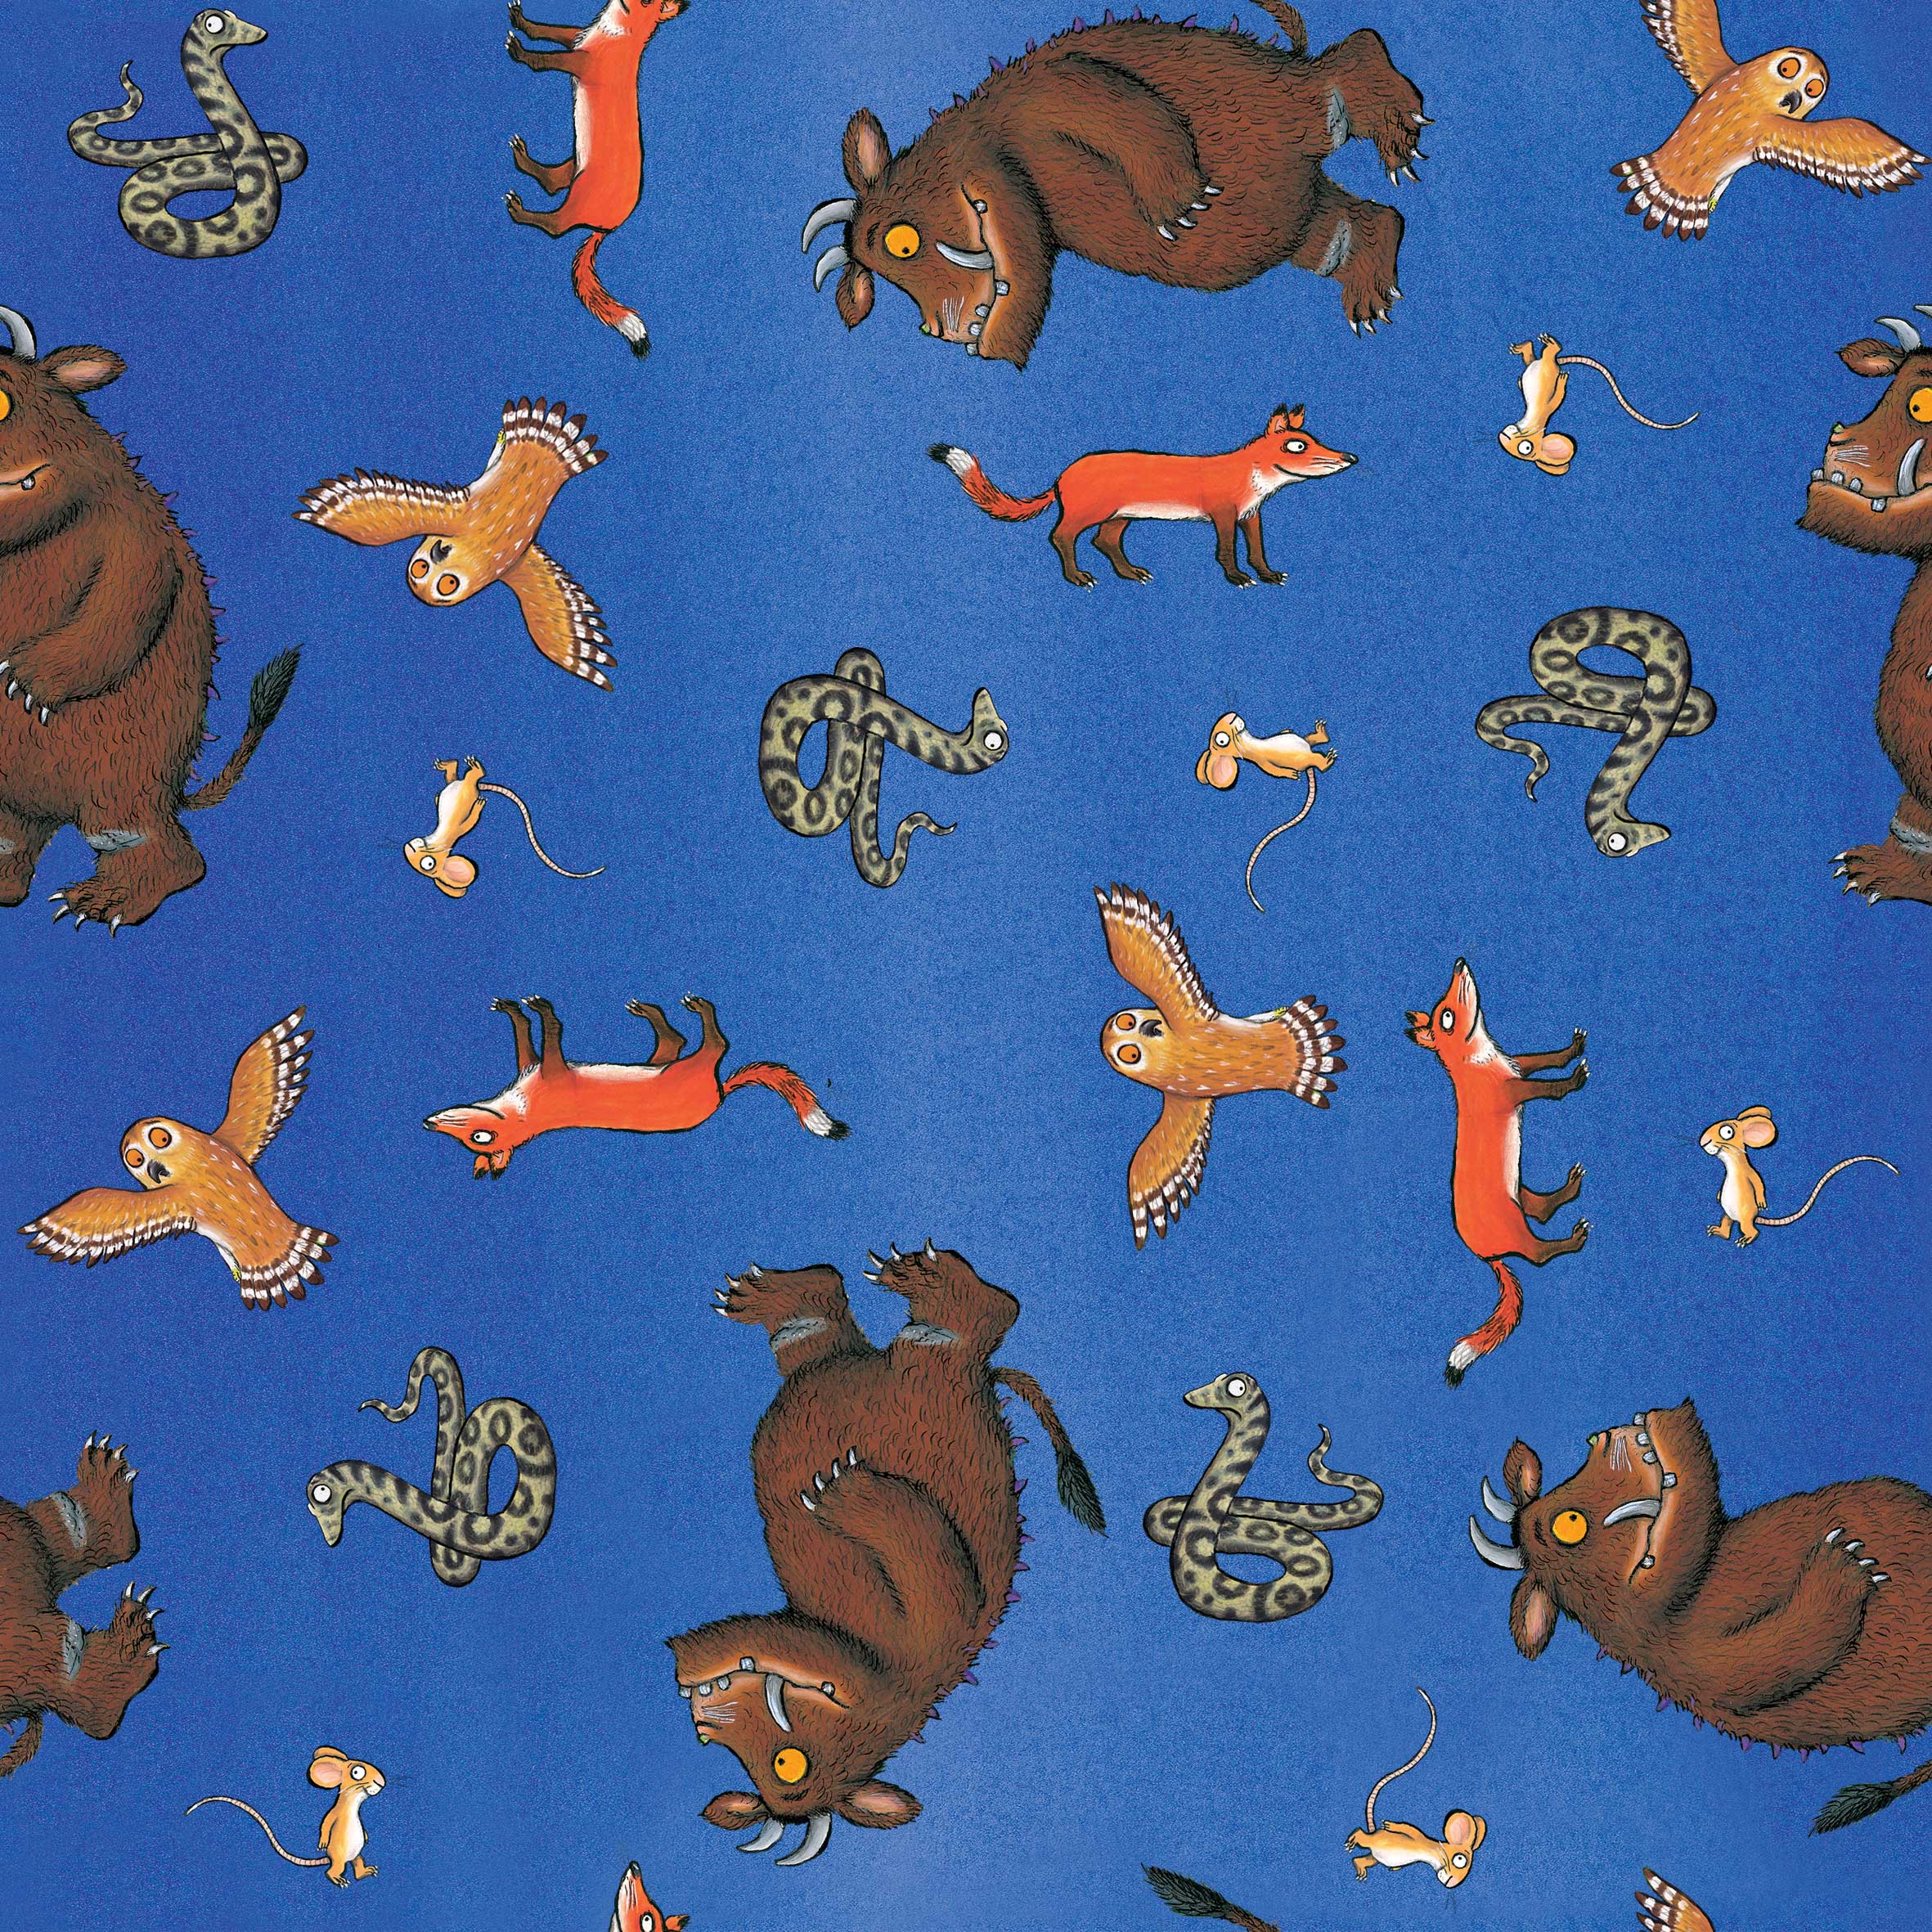 The Gruffalo And Friends Little Cloth Nappy